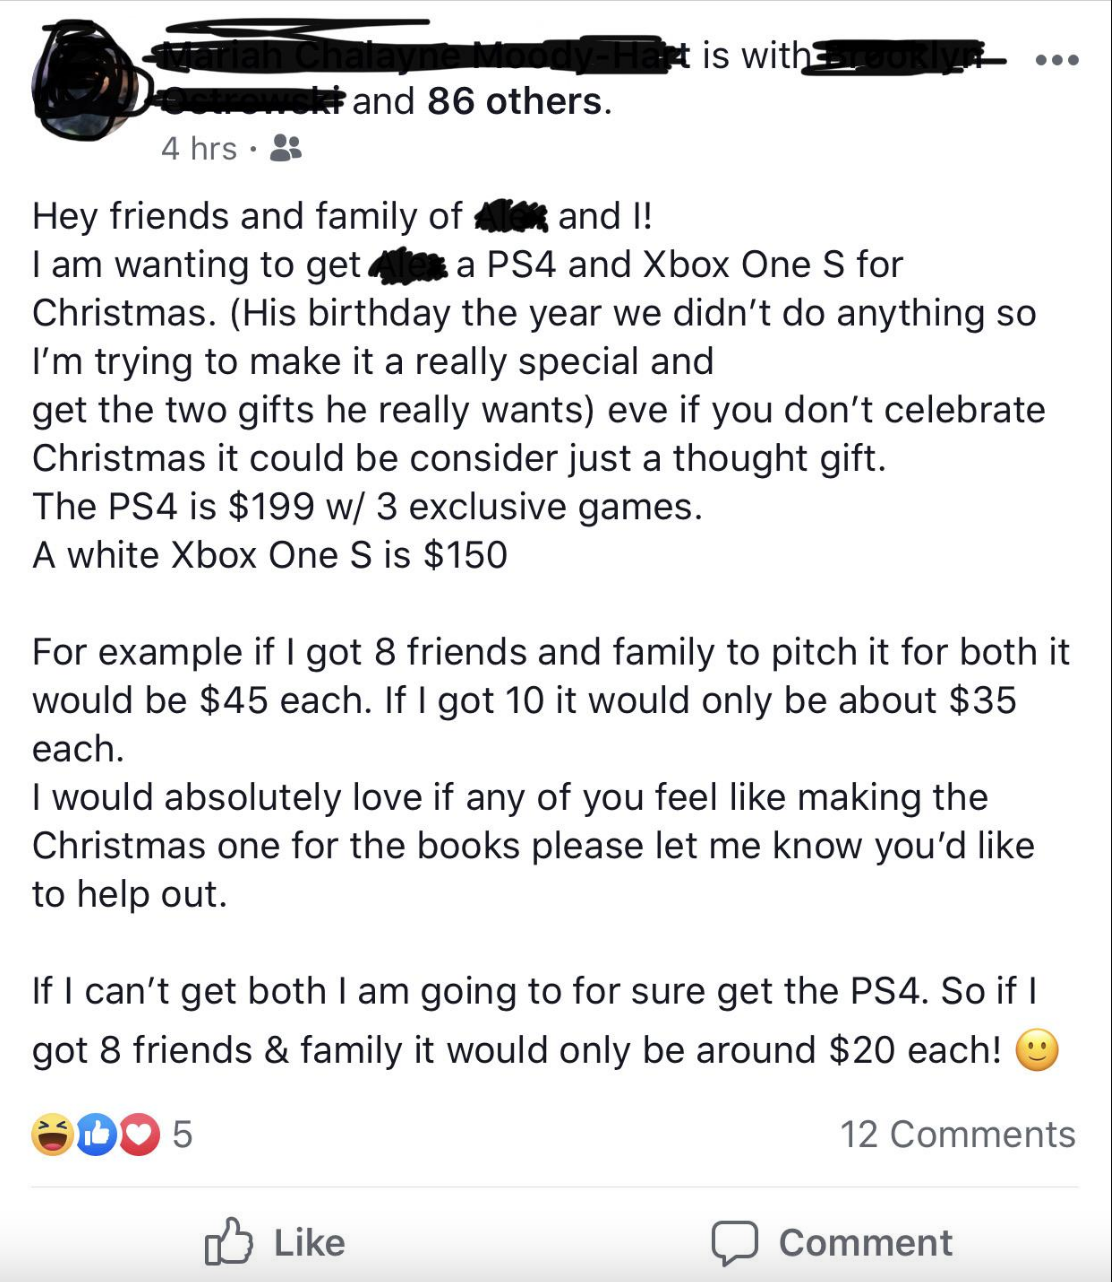 Person asks 8 friends and family to pitch in $45 each for a PS4 and Xbox One S for their kid, or 10 for about $35 each—or, if they must, just the PS4, which would only mean 8 friends and family pitching in around $20 each